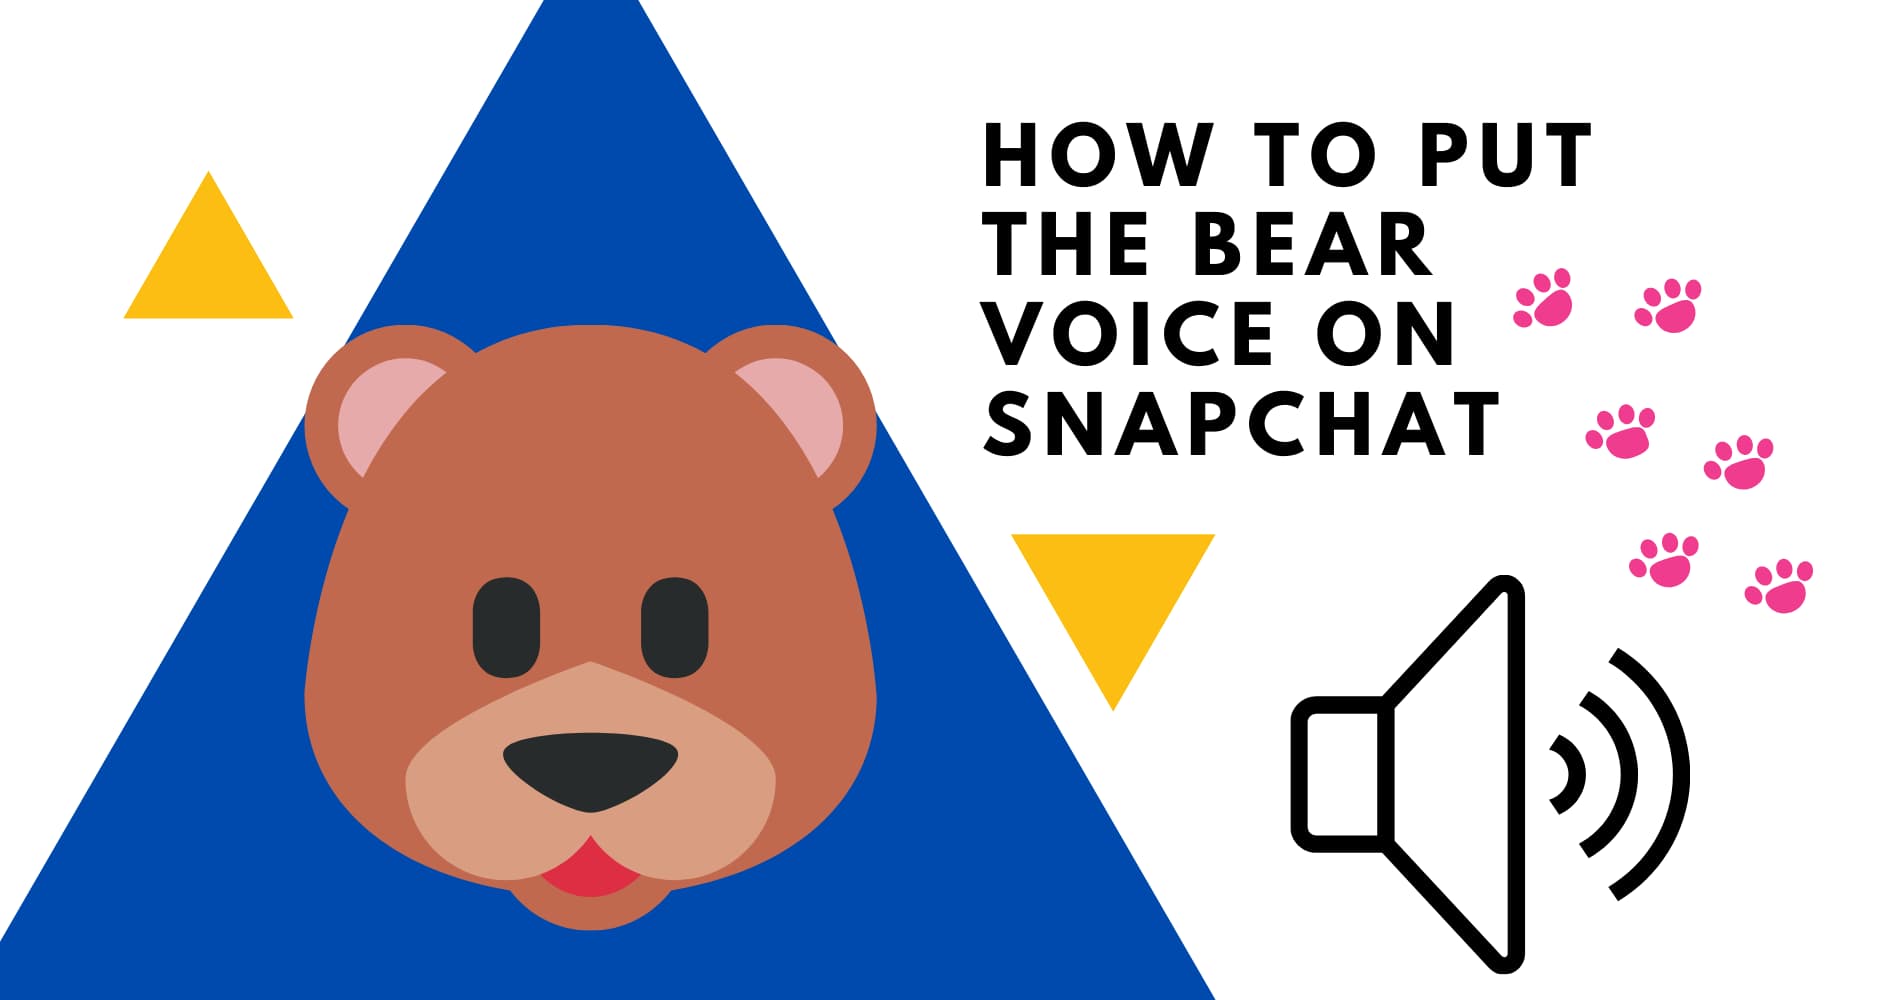 How to put the bear voice on Snapchat